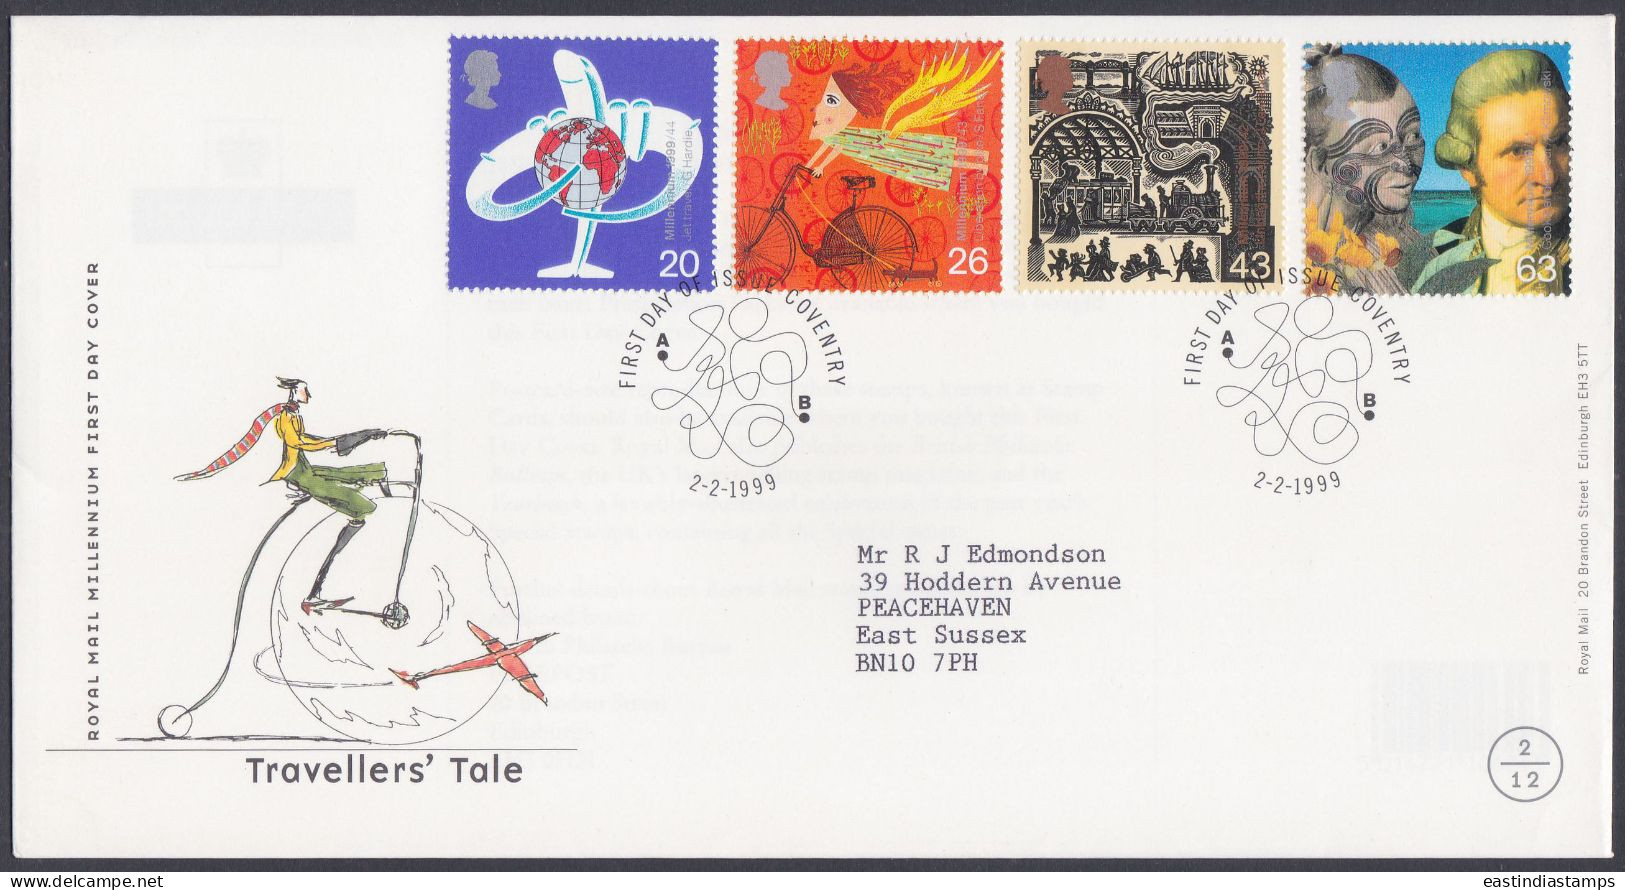 GB Great Britain 1999 FDC Travellers' Tale, Globe, Bicycle, Train, Captain Cook, Airplane, Railway, Pictorial Postmark - Covers & Documents